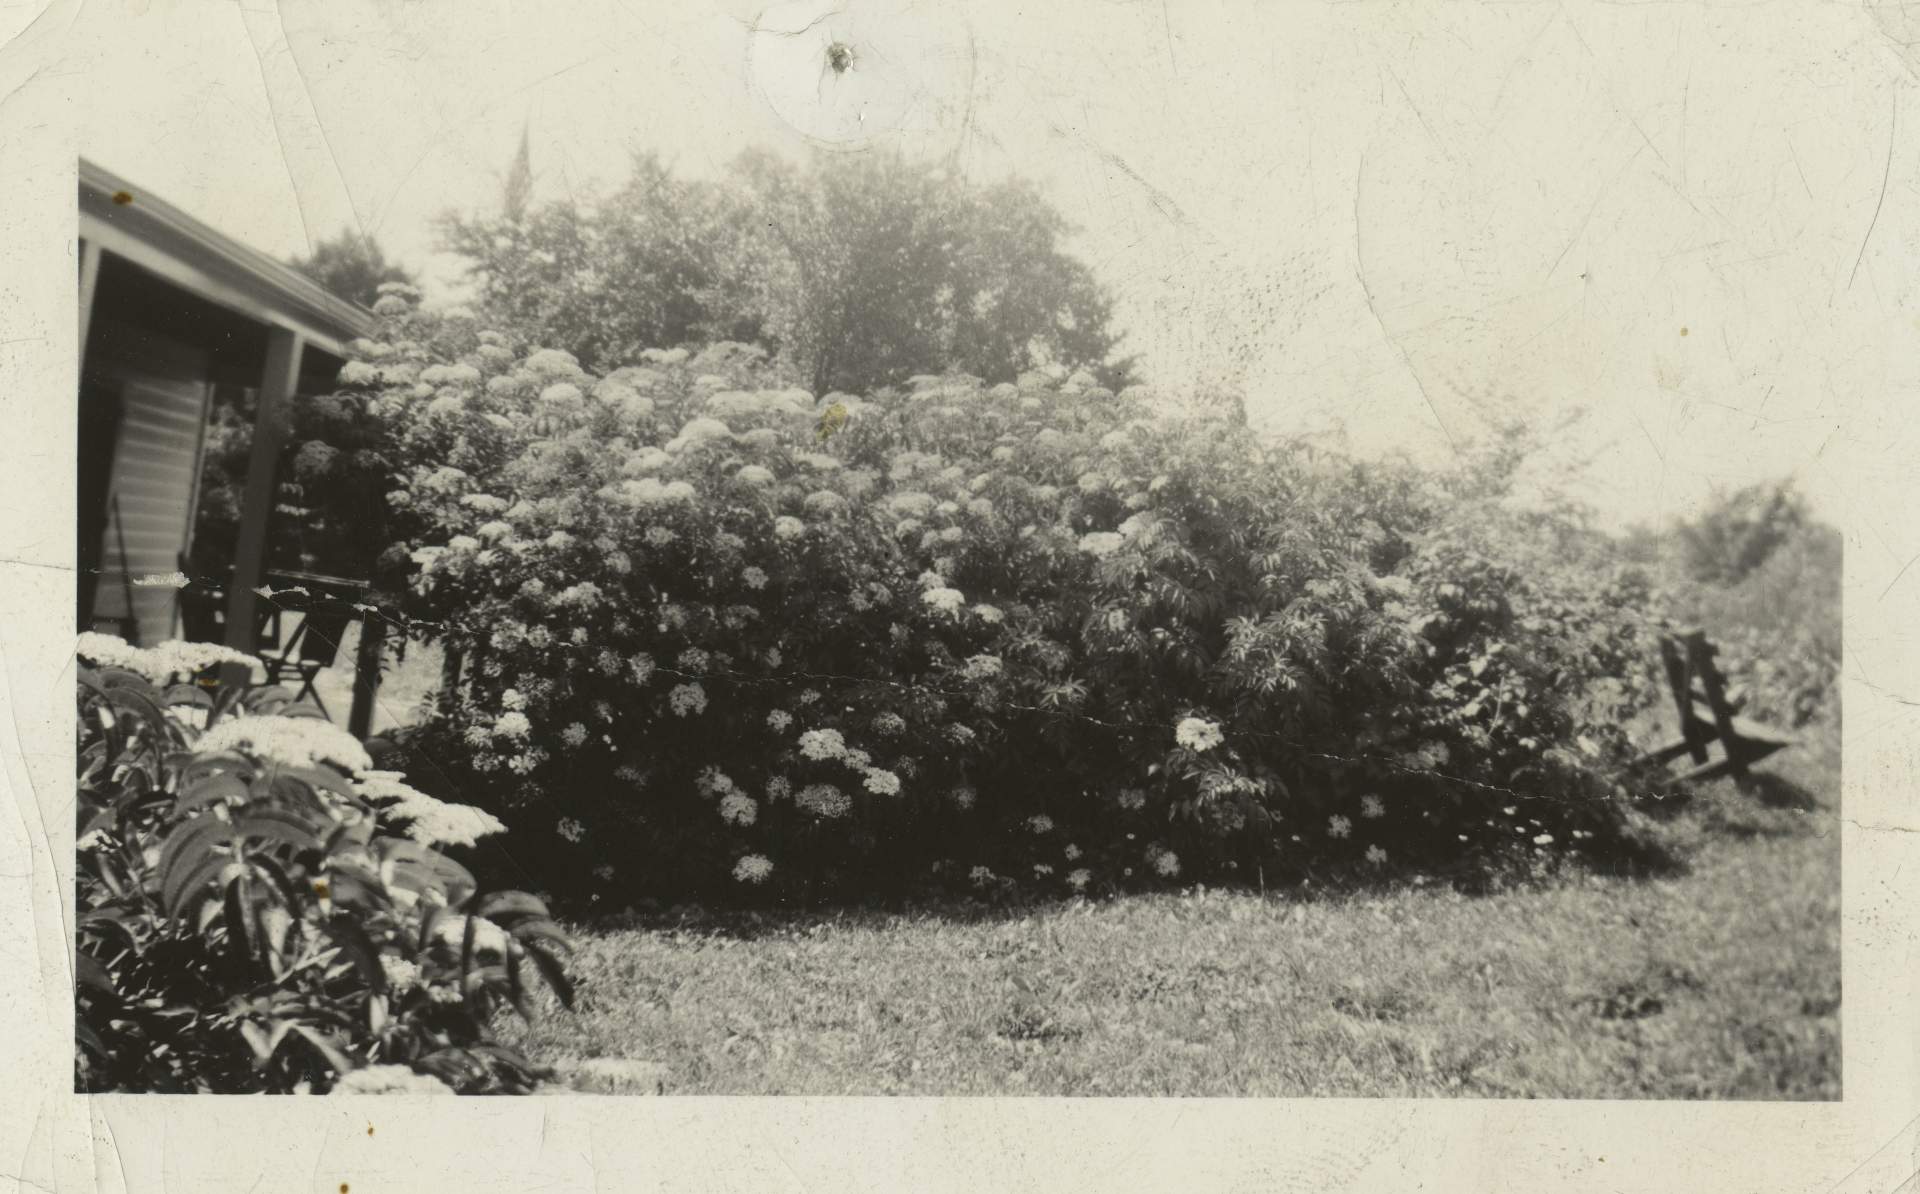 Camp—Mathews Hall (Partial view of porch and flowering bushes)